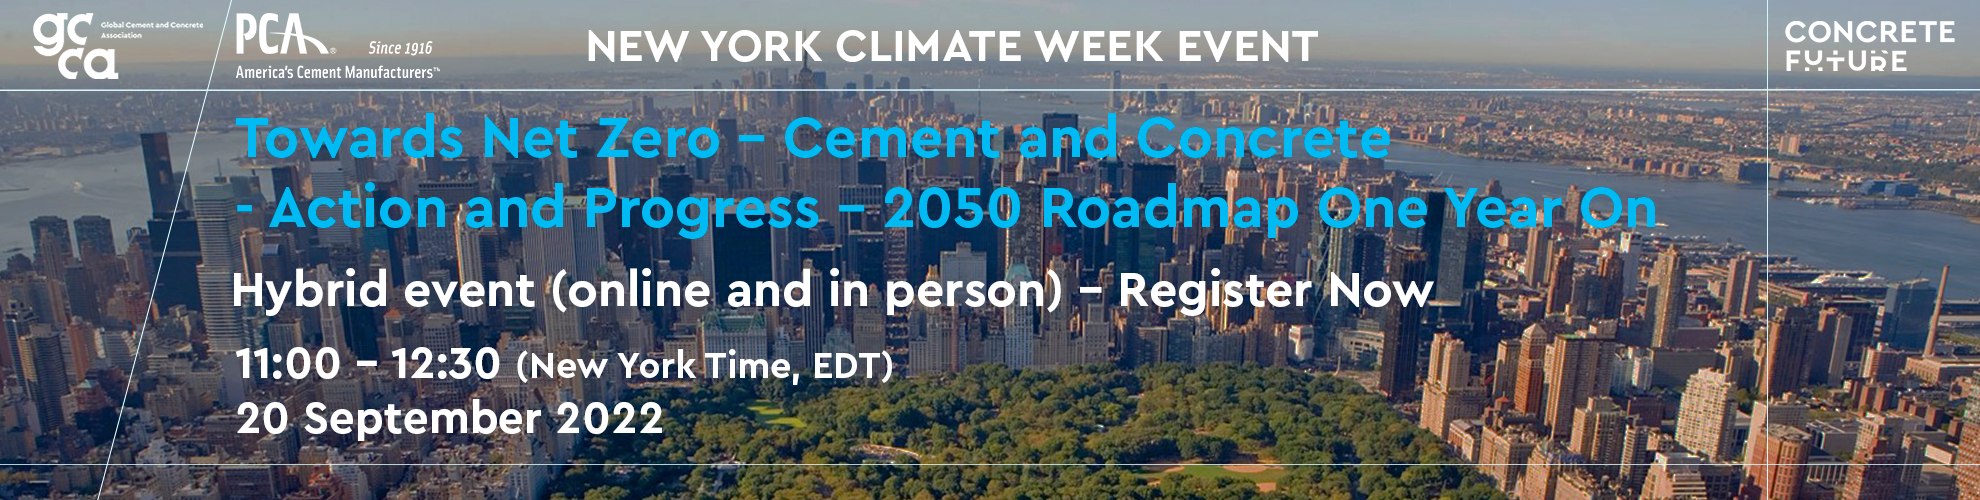 Climate Week NYC Panel Discussion: How the U.S. and Global Cement and Concrete Industry are Progressing on their Path to Net Zero